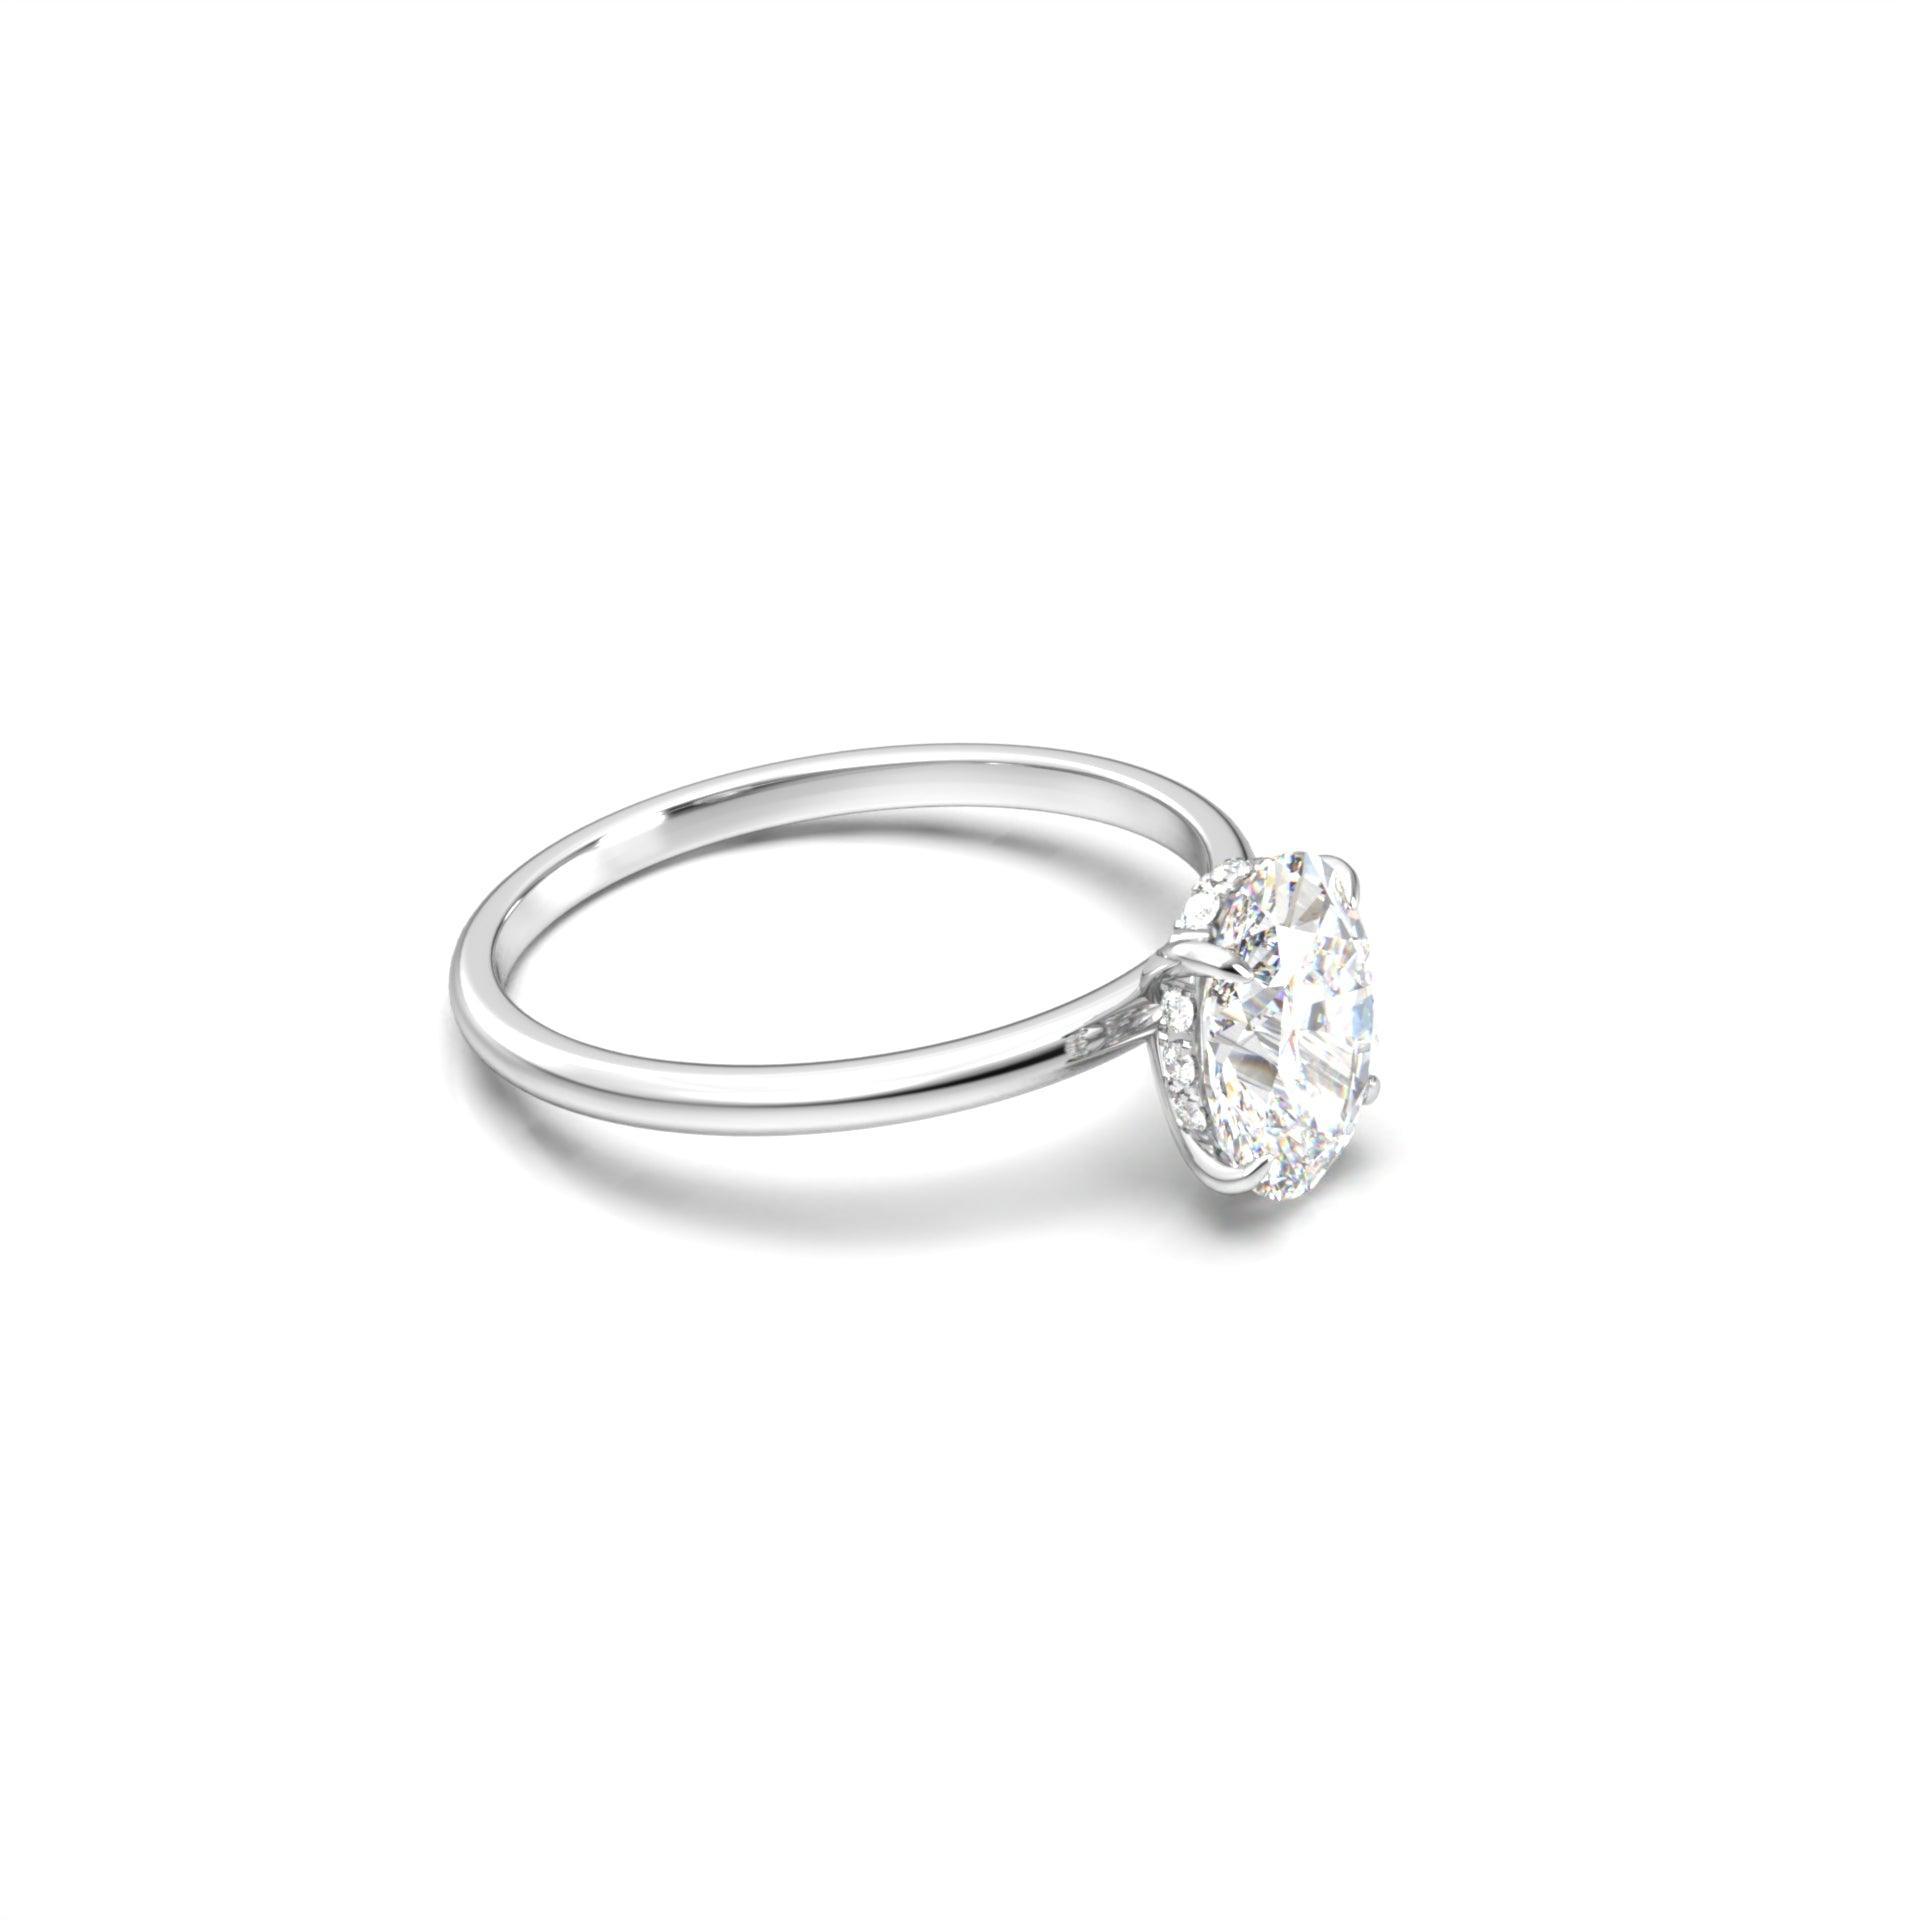 Oval Cut Solitaire 4 Claw With Hidden Halo Moissanite Engagement Ring - moissaniteengagementrings